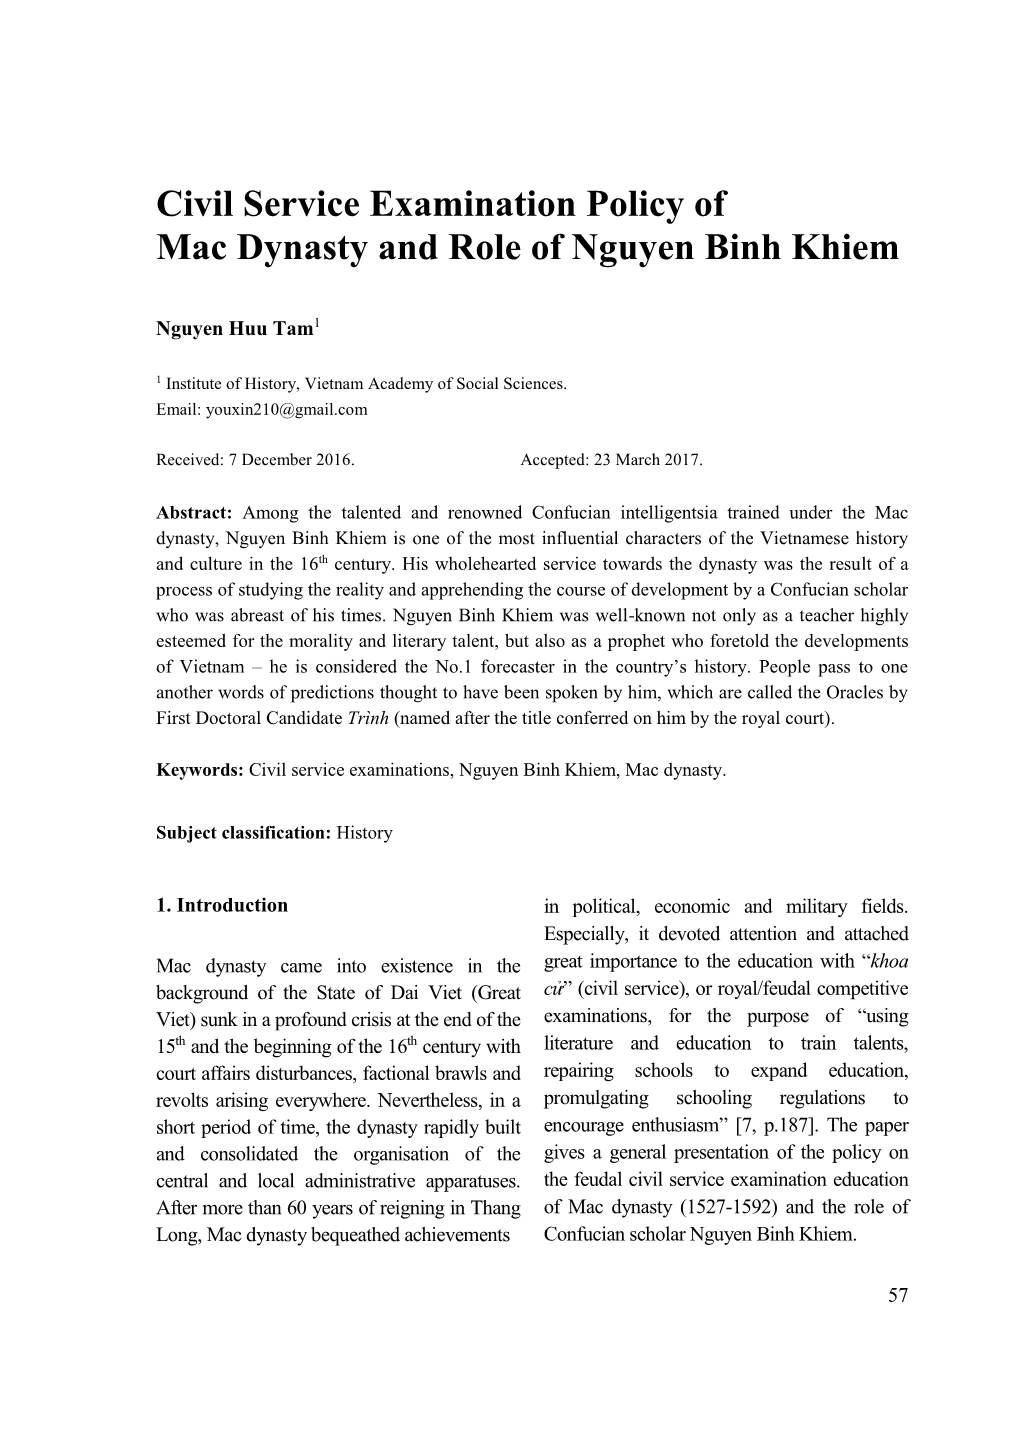 Civil Service Examination Policy of Mac Dynasty and Role of Nguyen Binh Khiem